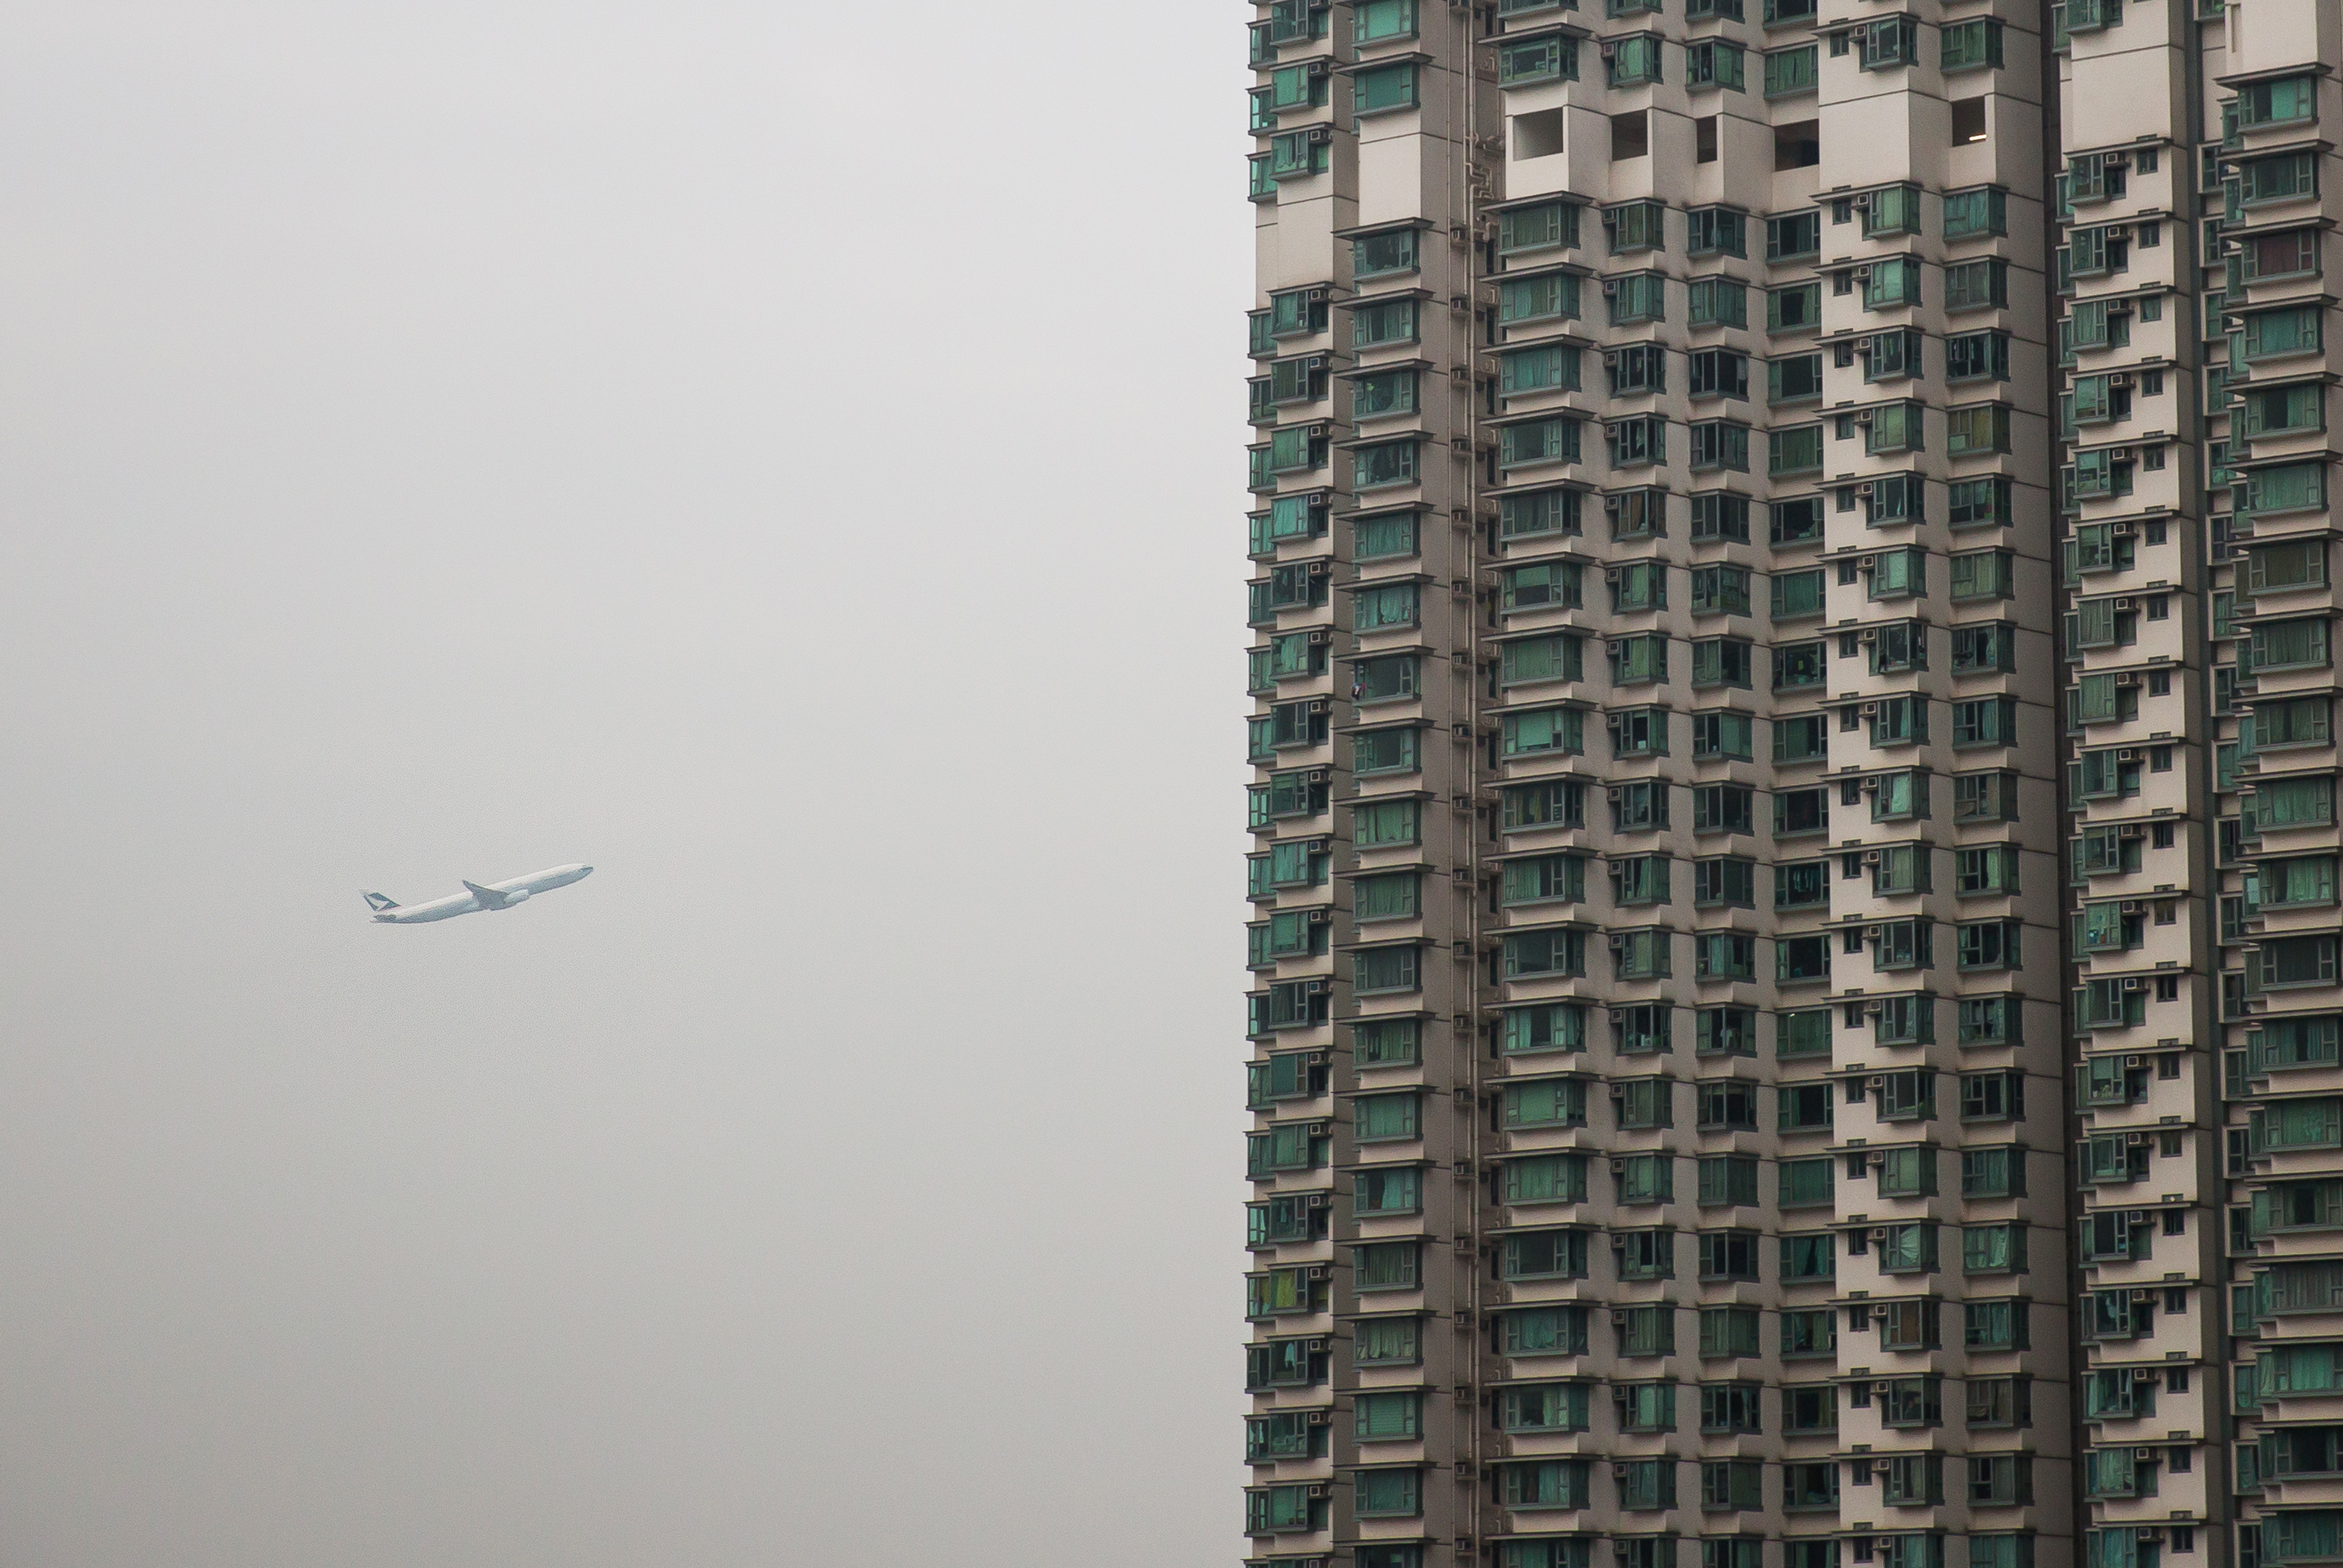 An aircraft flies past a residential building in the Tung Chung area of Hong Kong on Feb. 3, 2016 (Bloomberg/Getty Images)